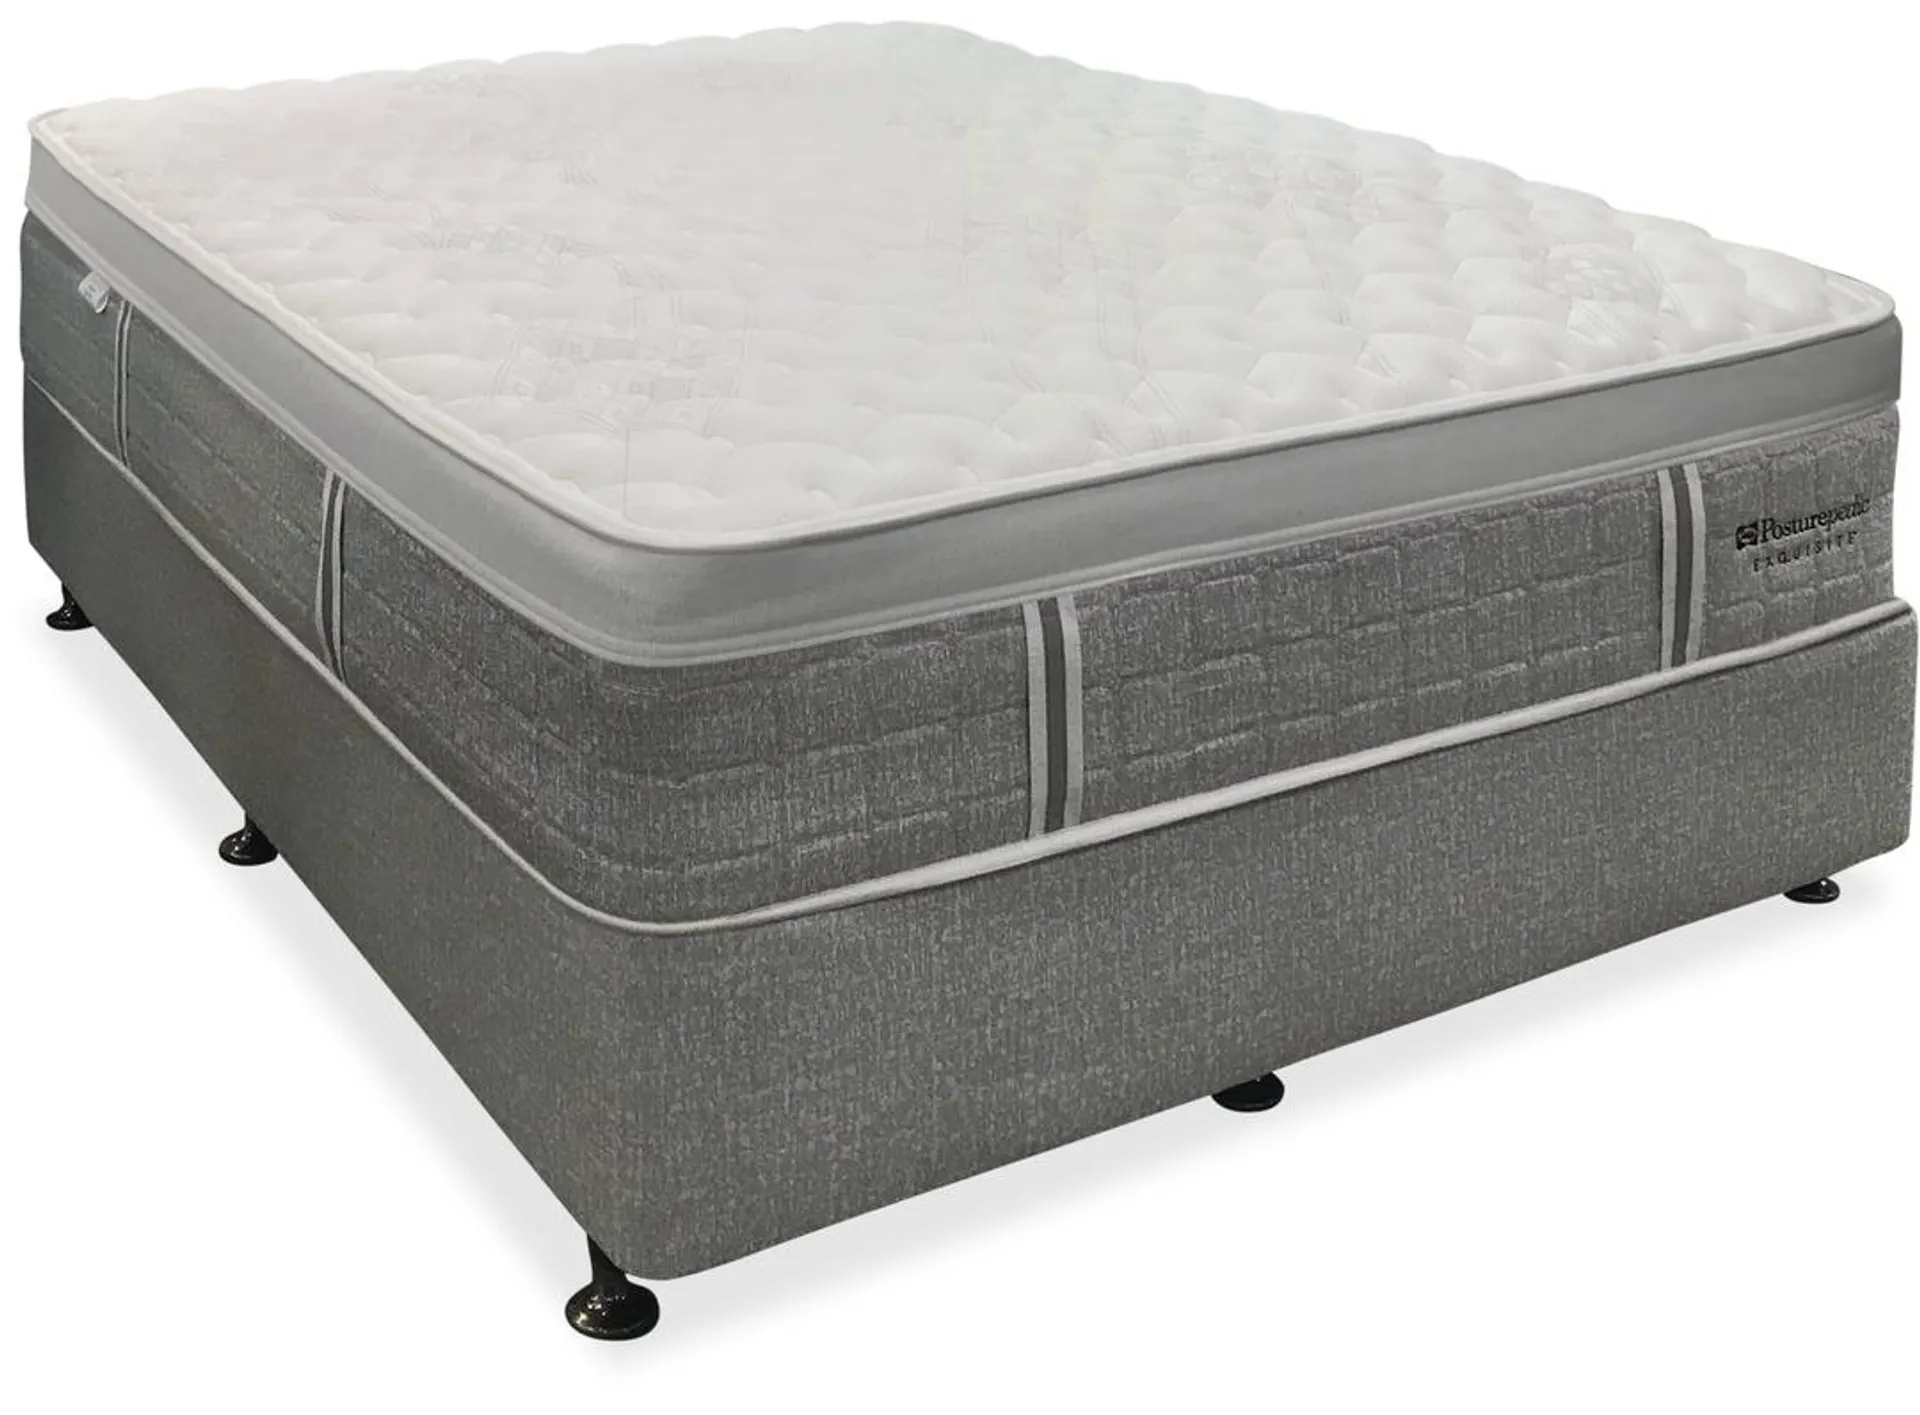 Sealy Exquisite Balmoral Firm - King Mattress & Base